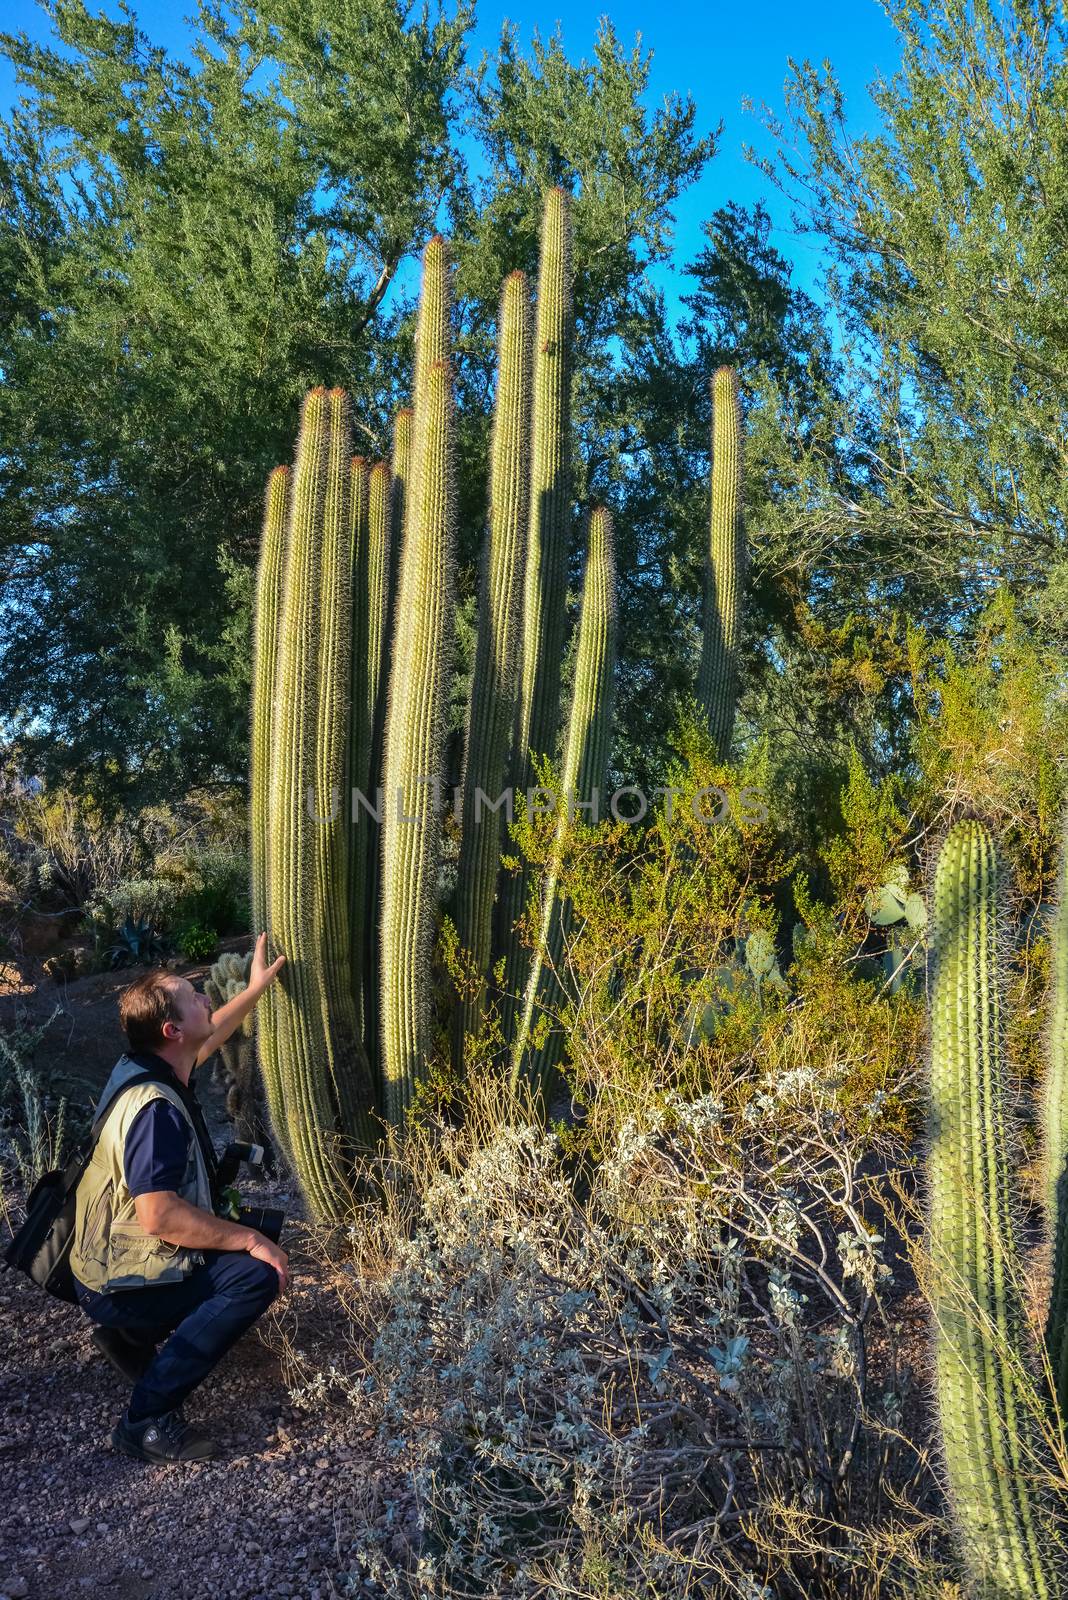 Tourist examines a large cactus in the Phoenix Botanical Garden by Hydrobiolog